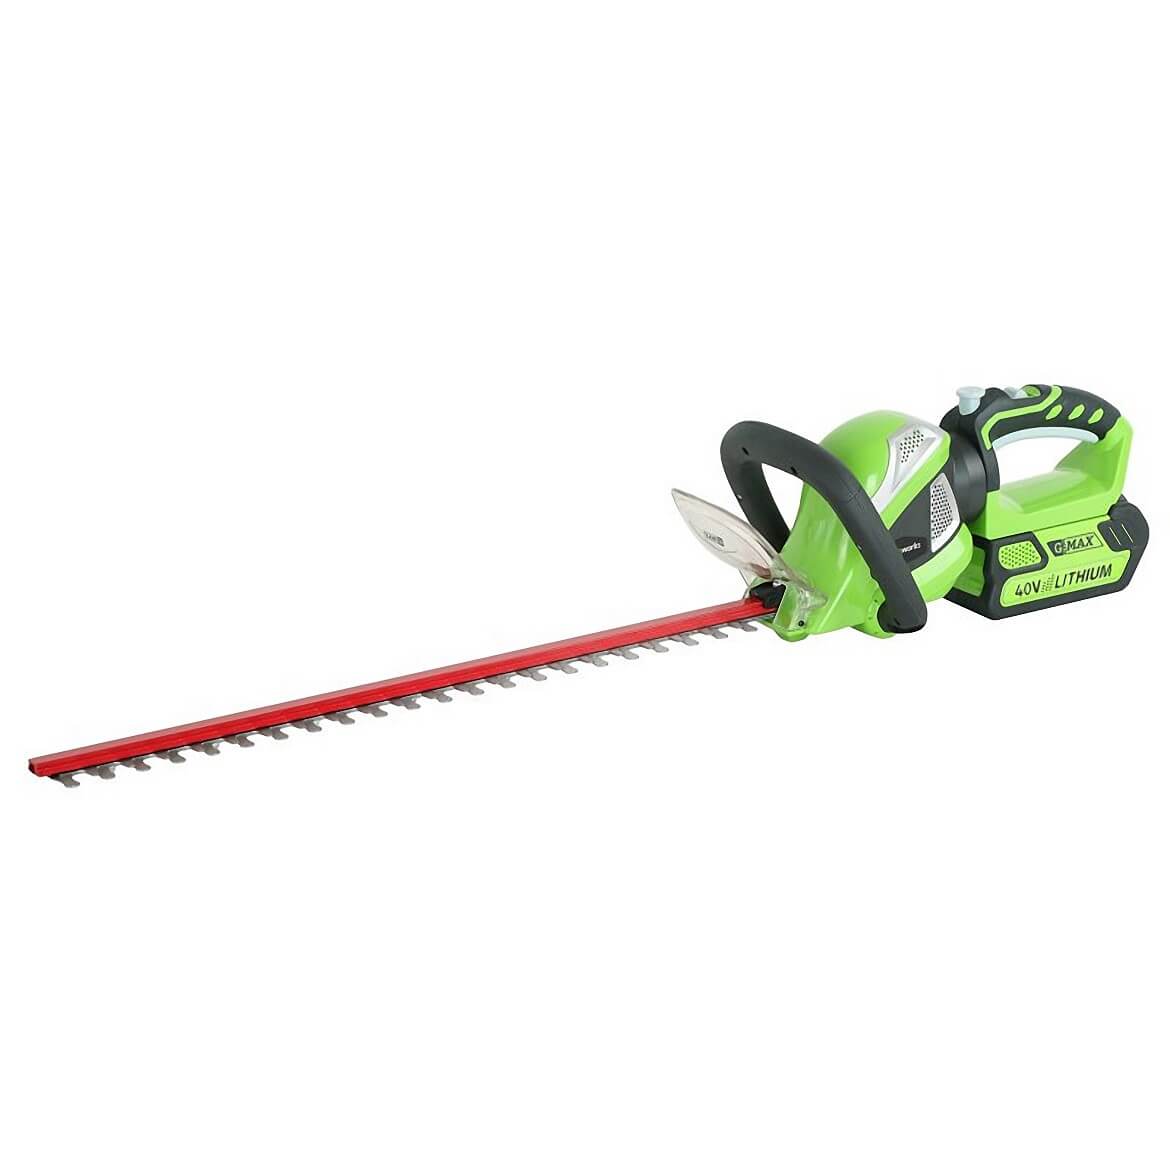 40V Lithium-Ion 24-Inch Cordless Hedge Trimmer with Dual-Action Blade